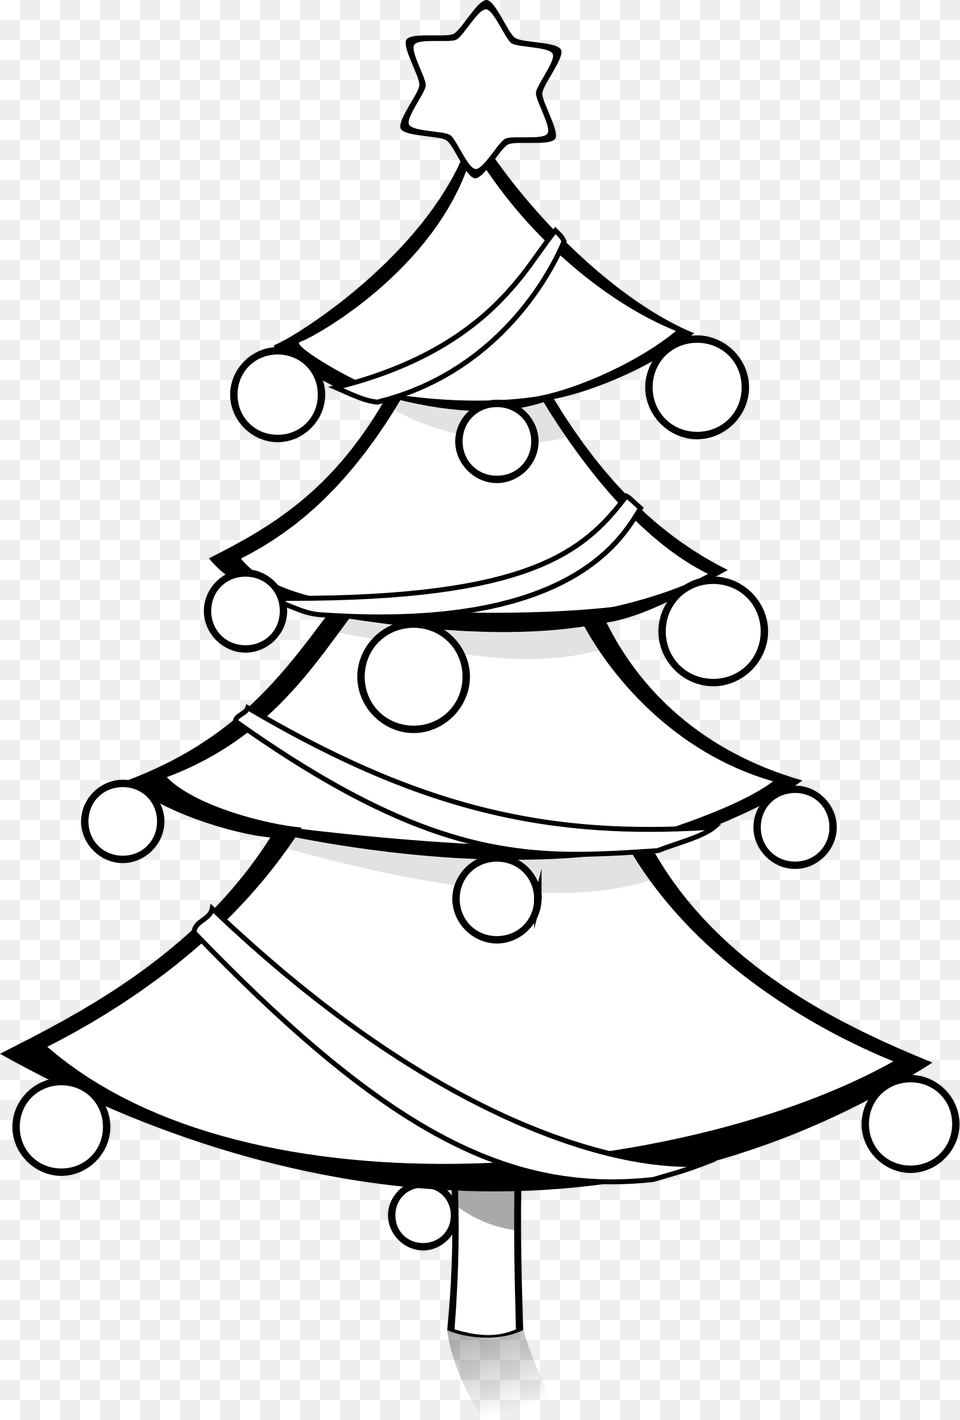 Christmas Tree With Balls Vector Illustration Christmas Tree Clipart Black And White, Stencil, Christmas Decorations, Festival, Person Png